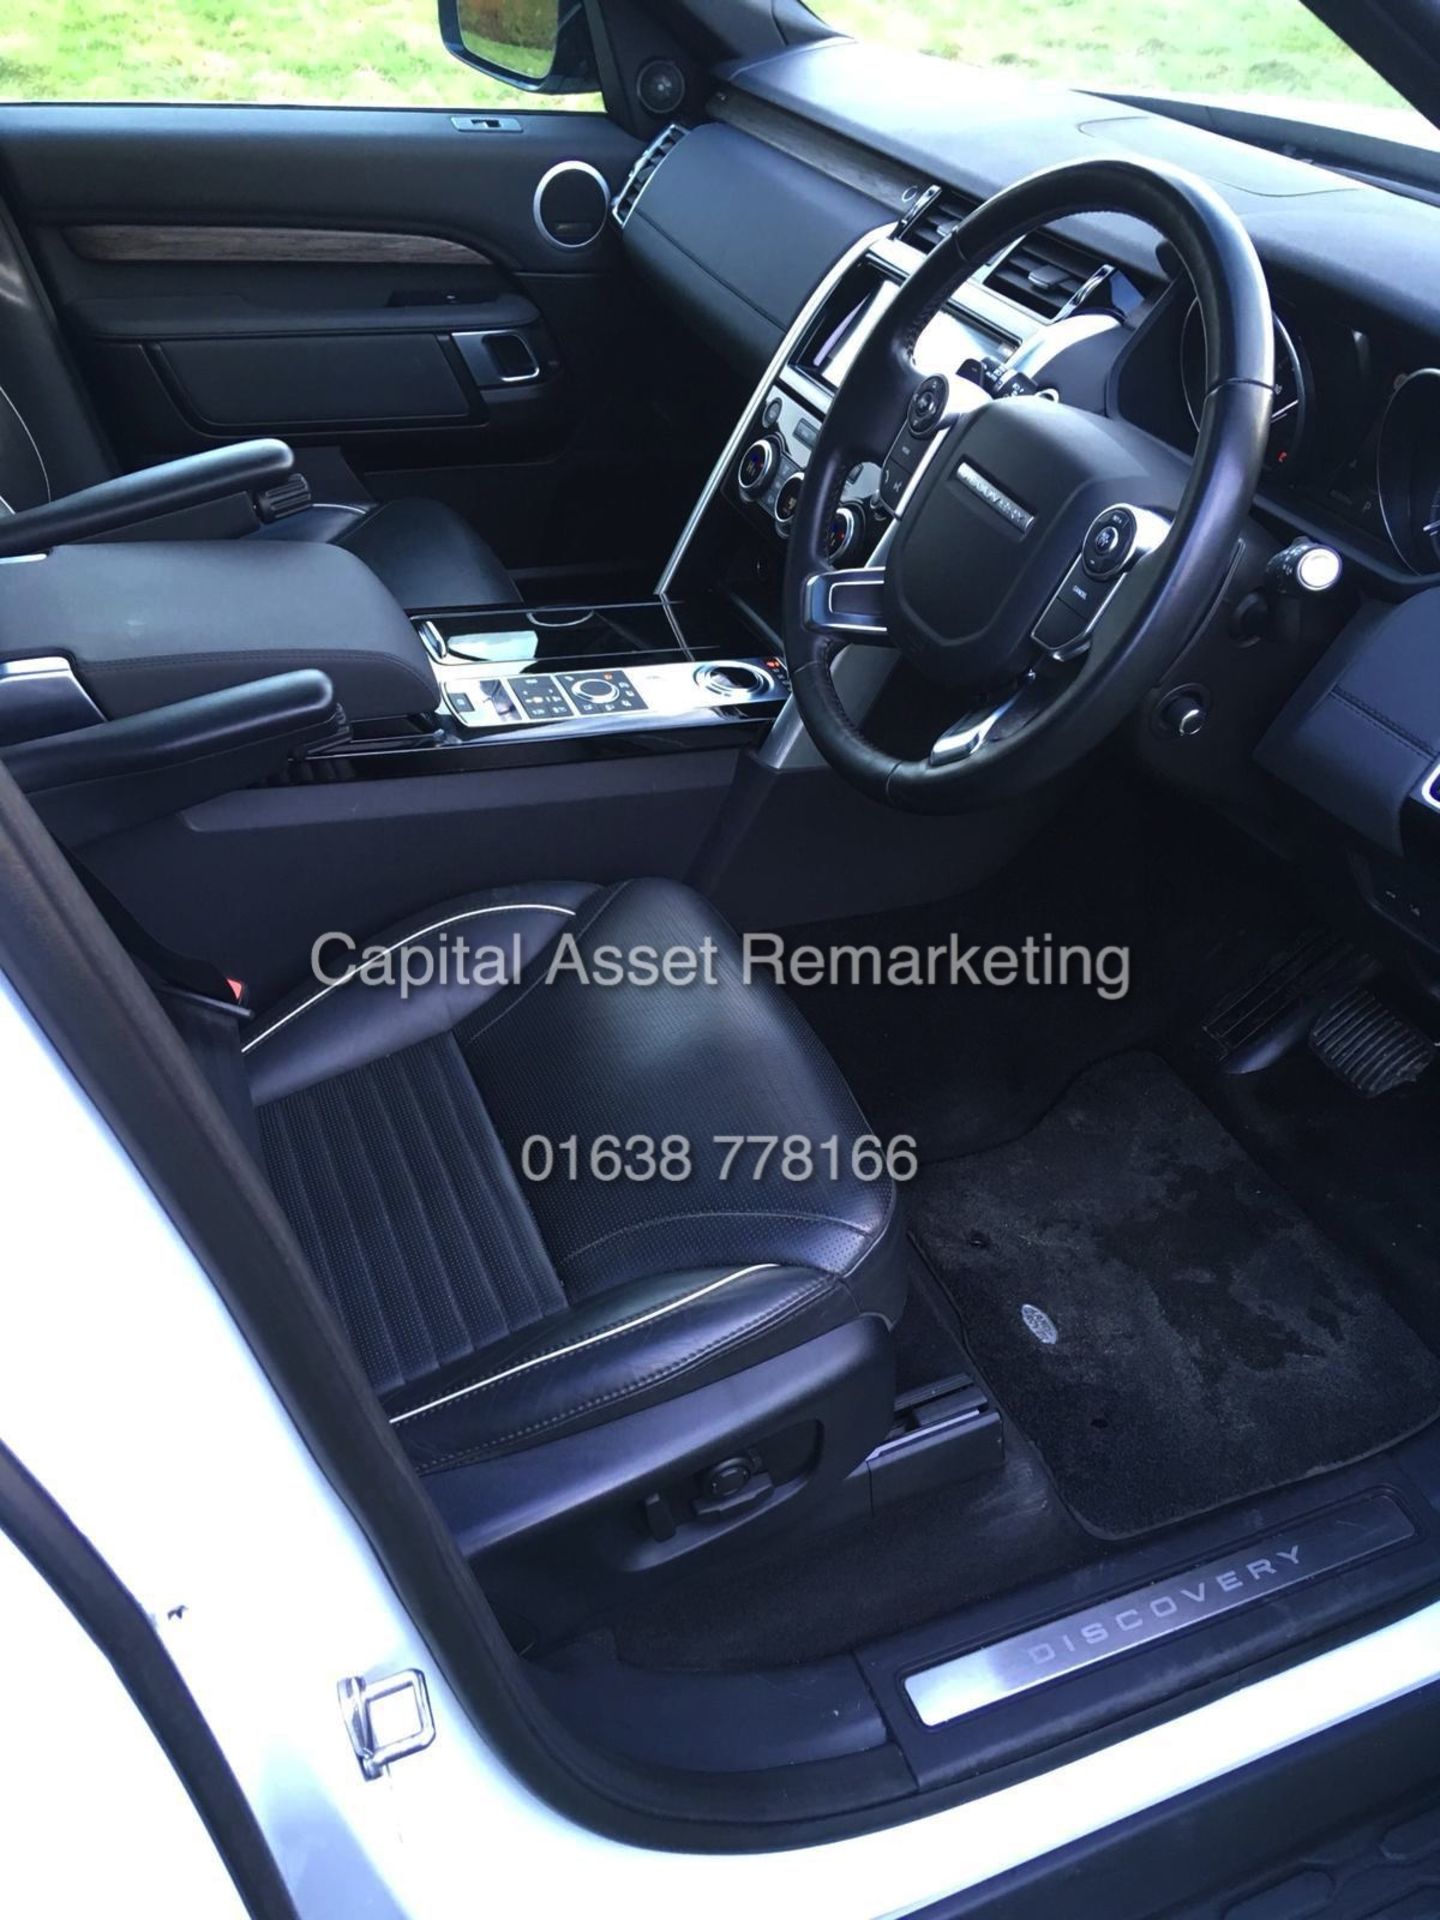 LAND ROVER DISCOVERY 5 "HSE" 3.0TD6 AUTO (17 REG - NEW SHAPE) FULLY LOADED PAN ROOF - SAT NAV *LOOK* - Image 7 of 11